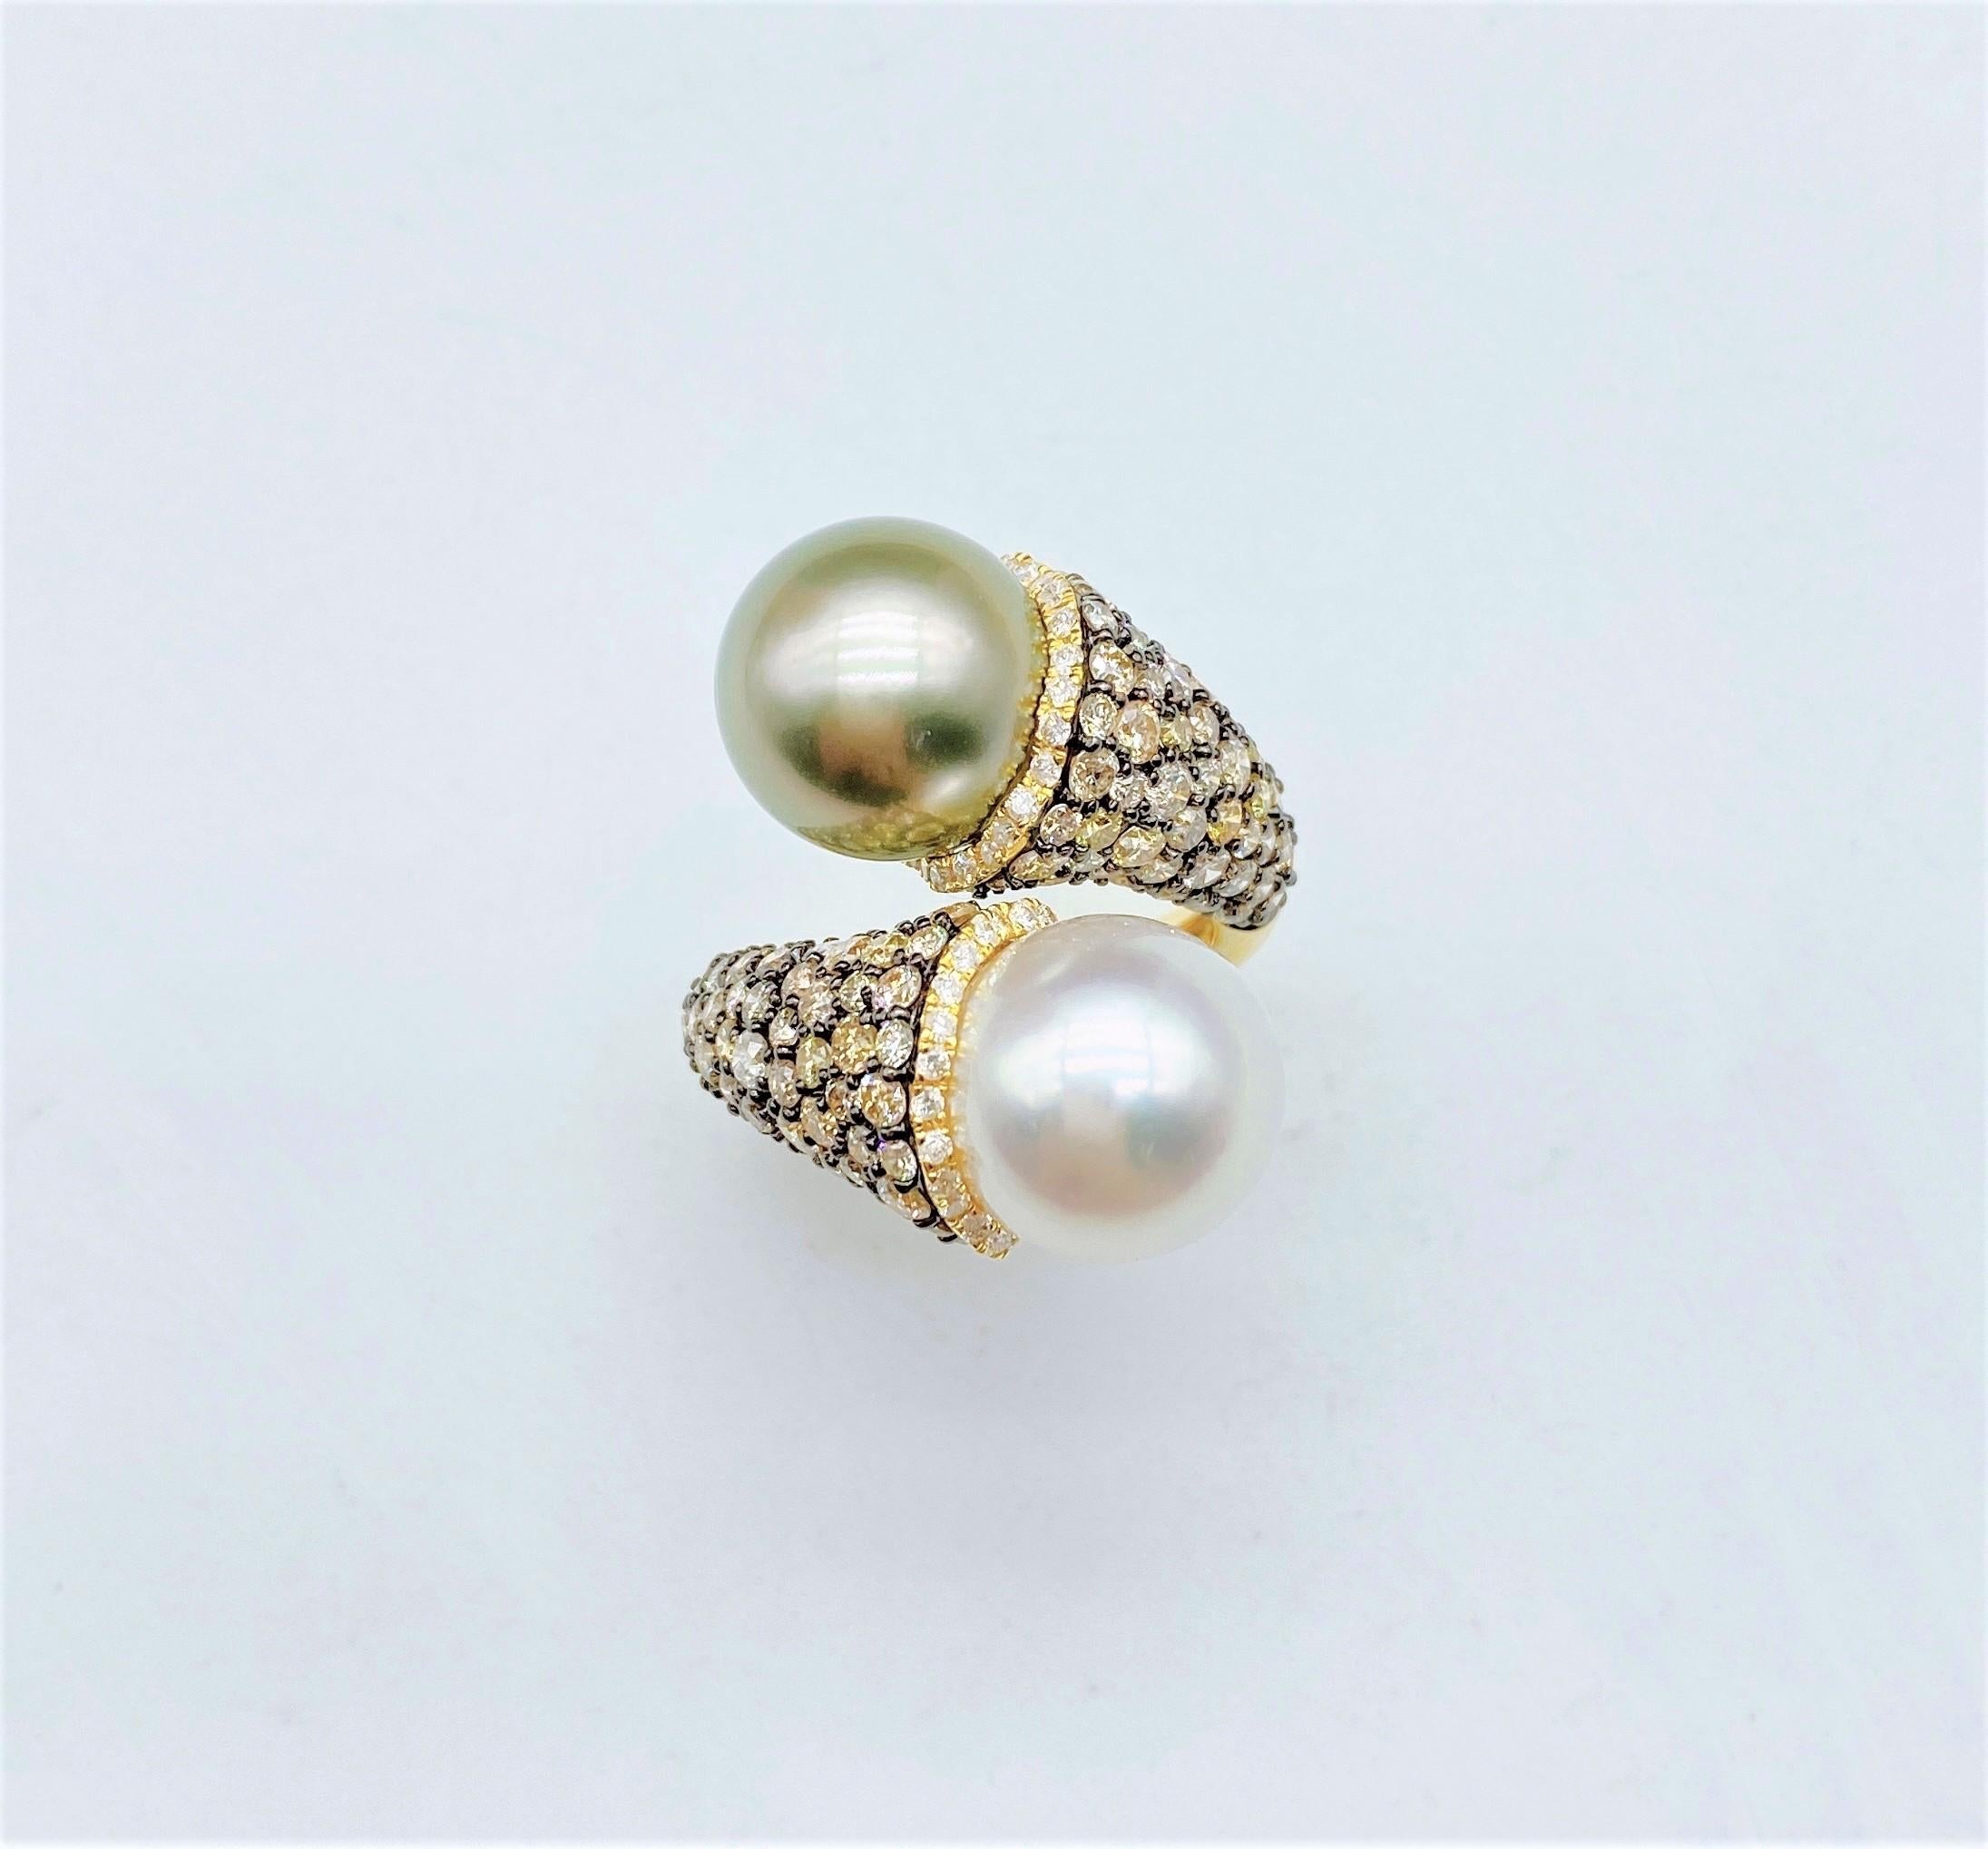 The Following Item we are offering is this Extremely Rare Beautiful 18KT Gold Fine Rare Large South Sea Pearl and Gray Tahitian Pearl Crossover Fancy Yellow Cognac Diamond Ring. This Magnificent Ring is comprised of Rare Fine Large South Sea Pearls